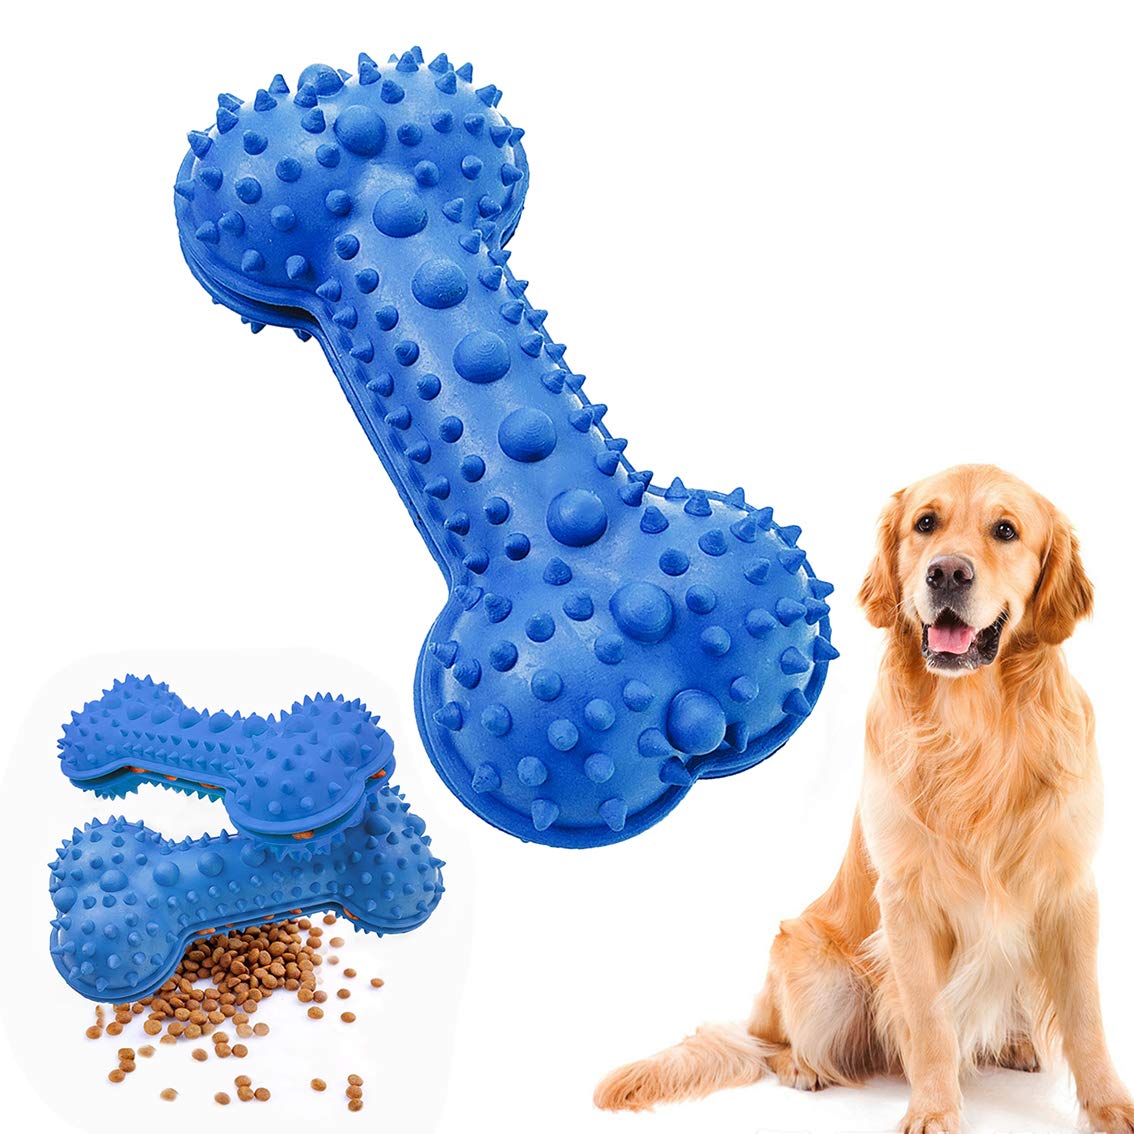 Dog Chew Toys Teething Training Durable Bone Chew Toy, Natural Rubber Non-Toxic Dog Teeth Cleaning Massager, Indestructible Dog Toy Highly Bite-Resistant Interactive Training Leaking Food Puppy Toys